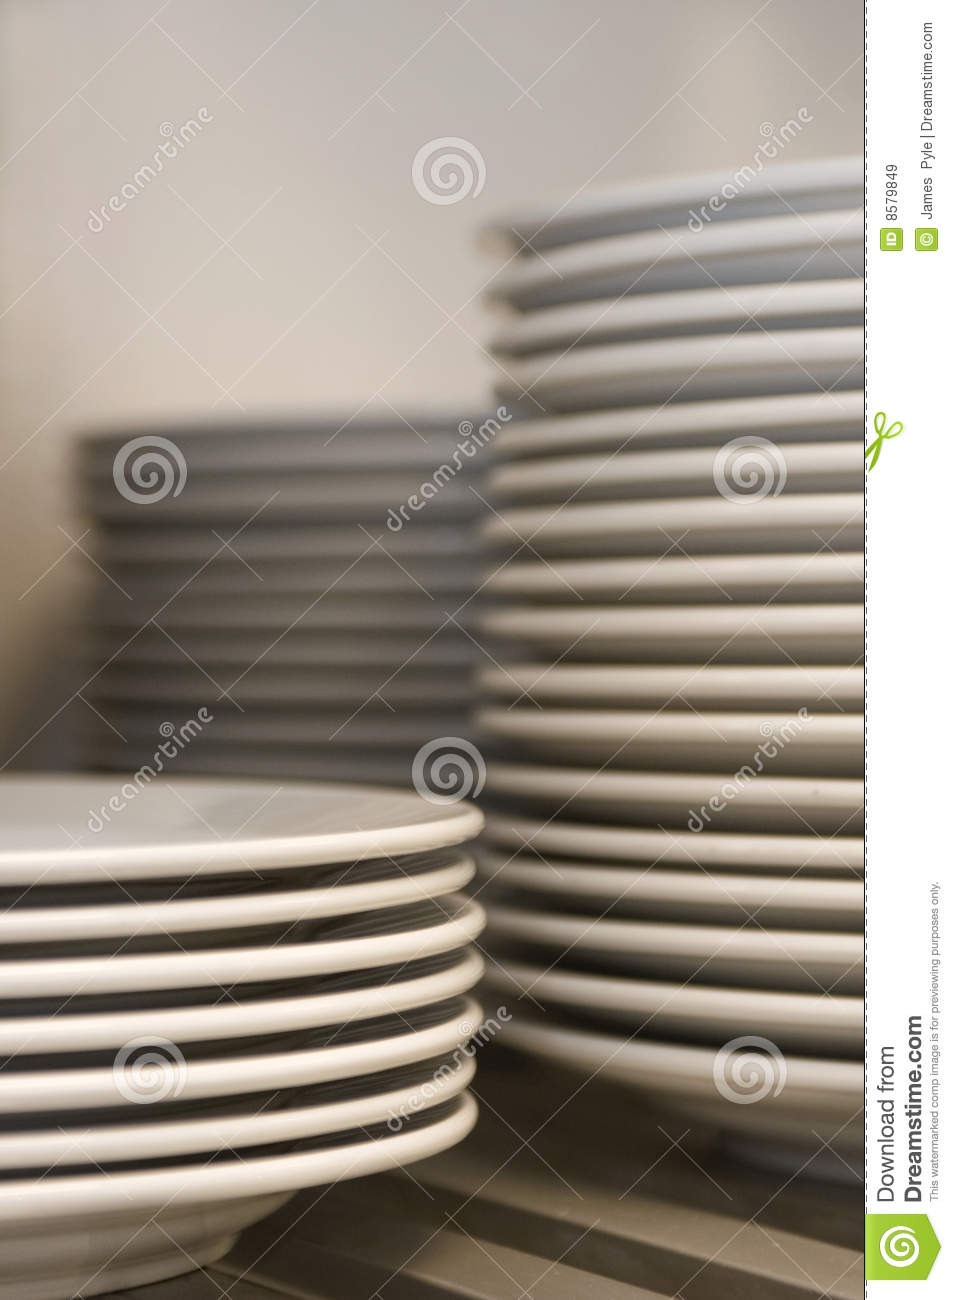 Stacked Plates Royalty Free Stock Images   Image  8579849